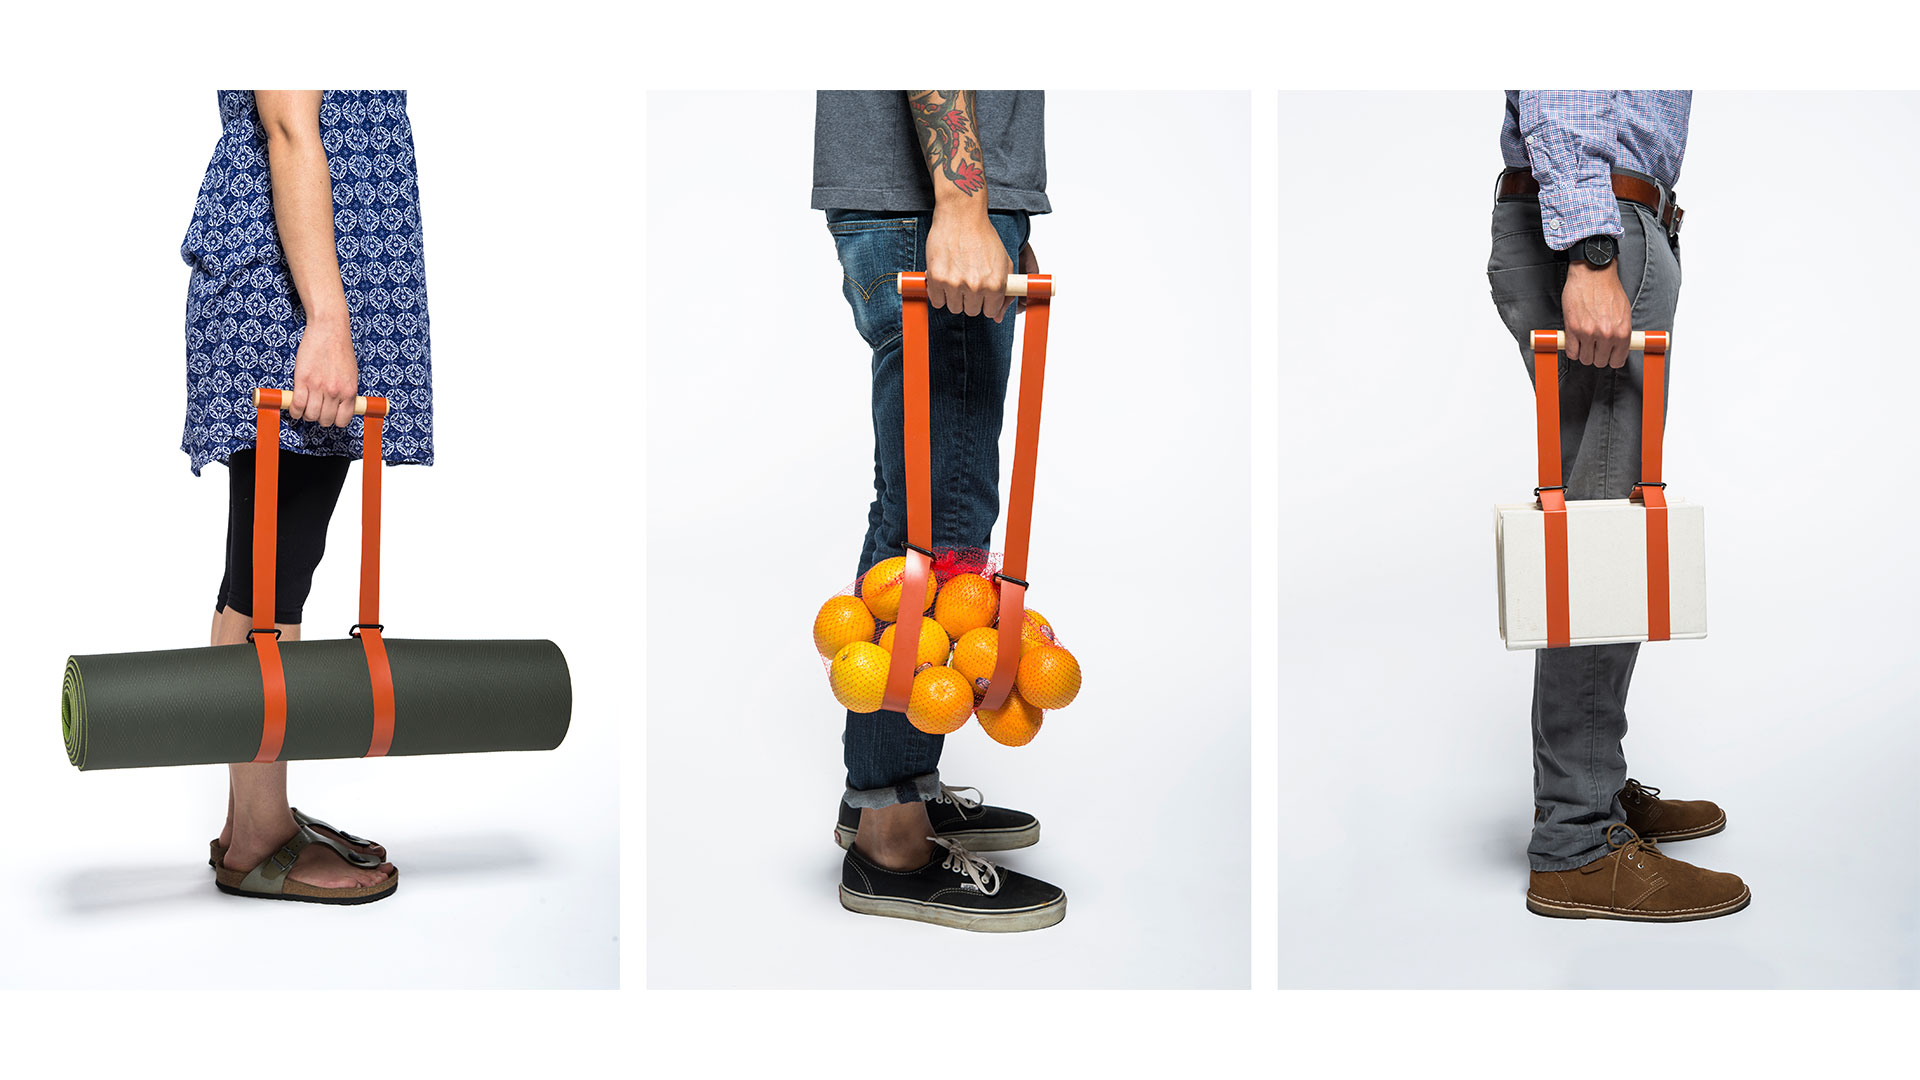 Three picture side by side of students facing to the right, each holding a wooden bar with orange bands that extend down to wrap around various items for easy transportation, a yoga mat, a bulk bag of oranges, and some large books in that order